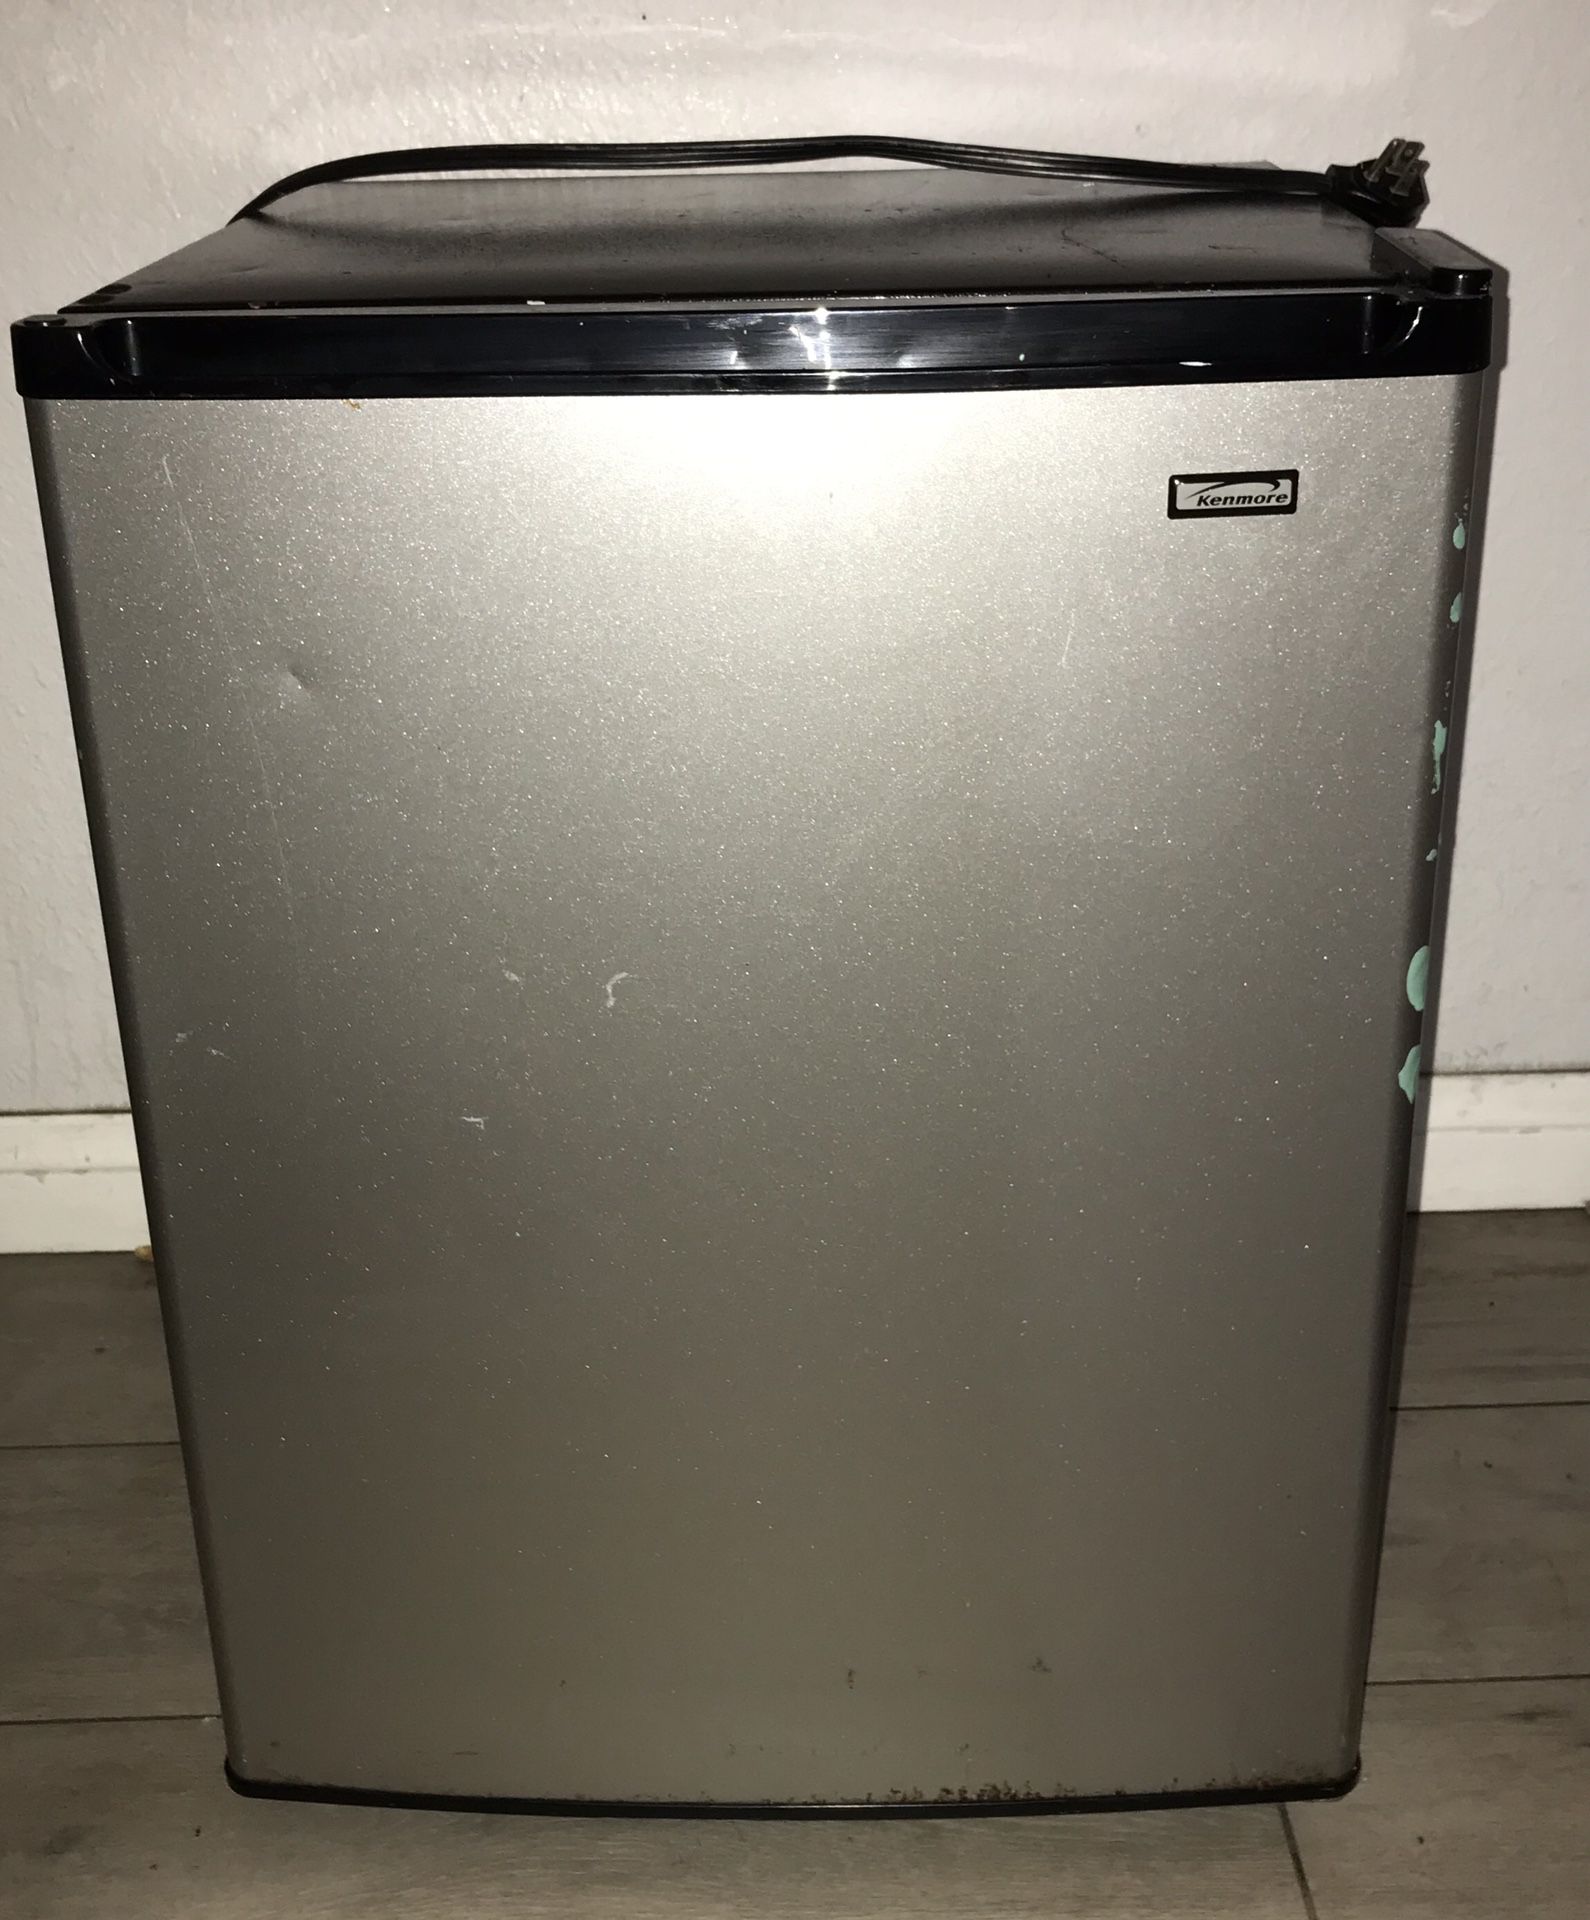 Kennore small mini Fridge (nothing wrong with it)